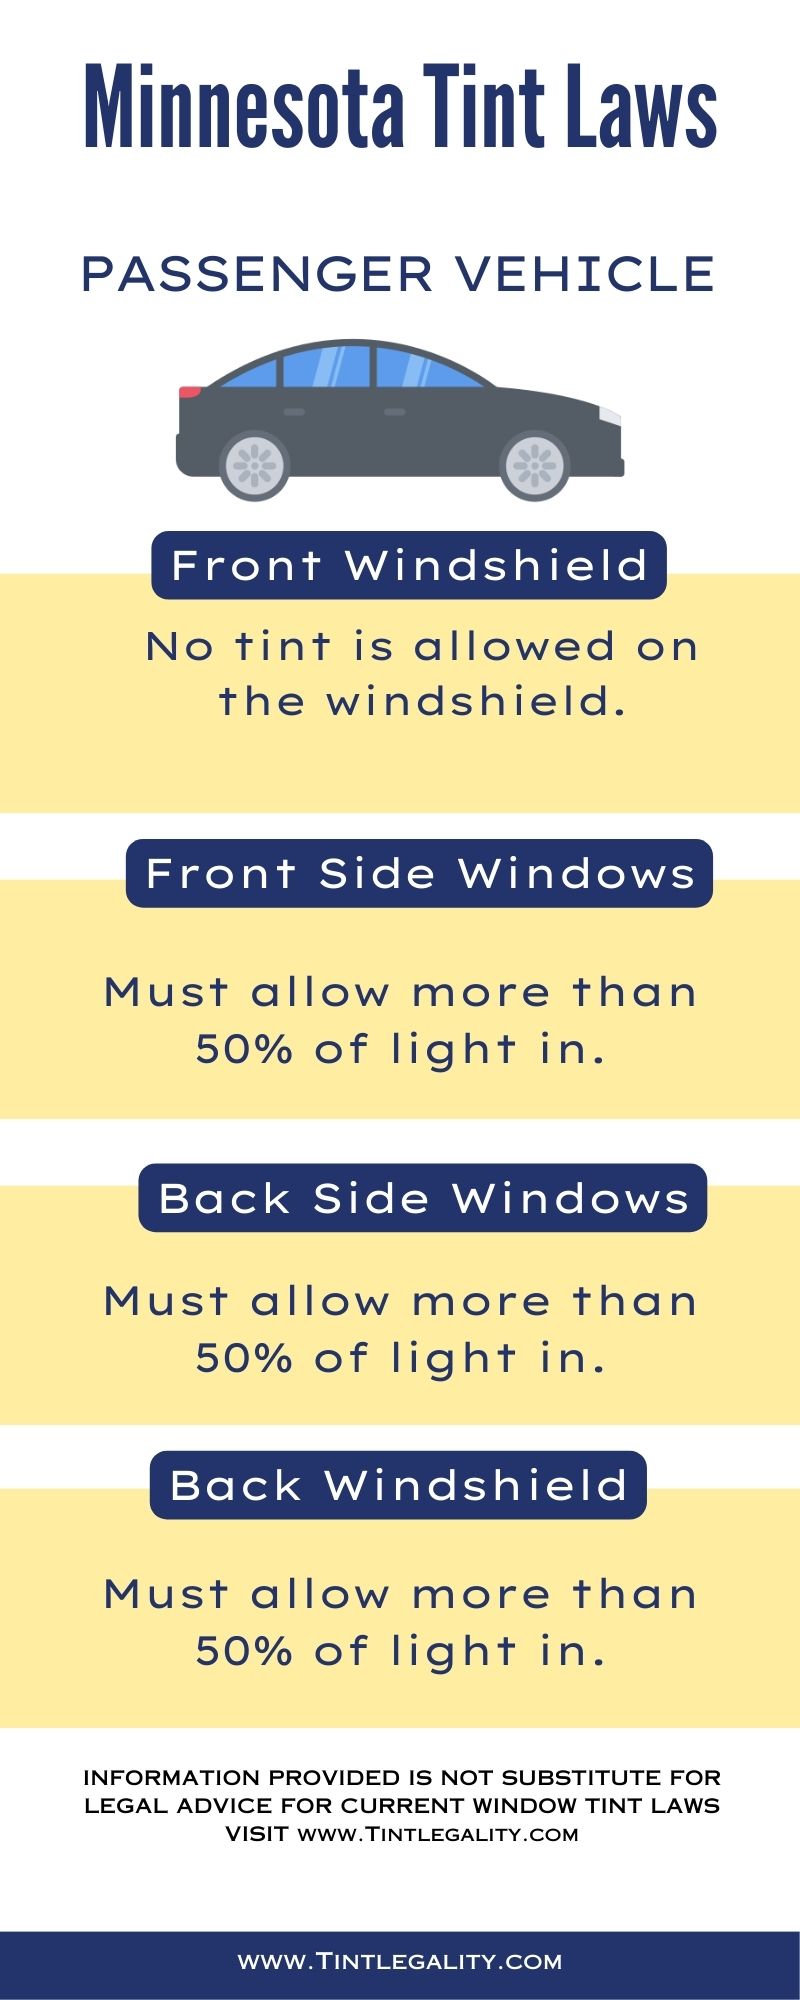 Minnesota Tint Laws 5 MustKnow Rules for 2023 Stay Compliant!